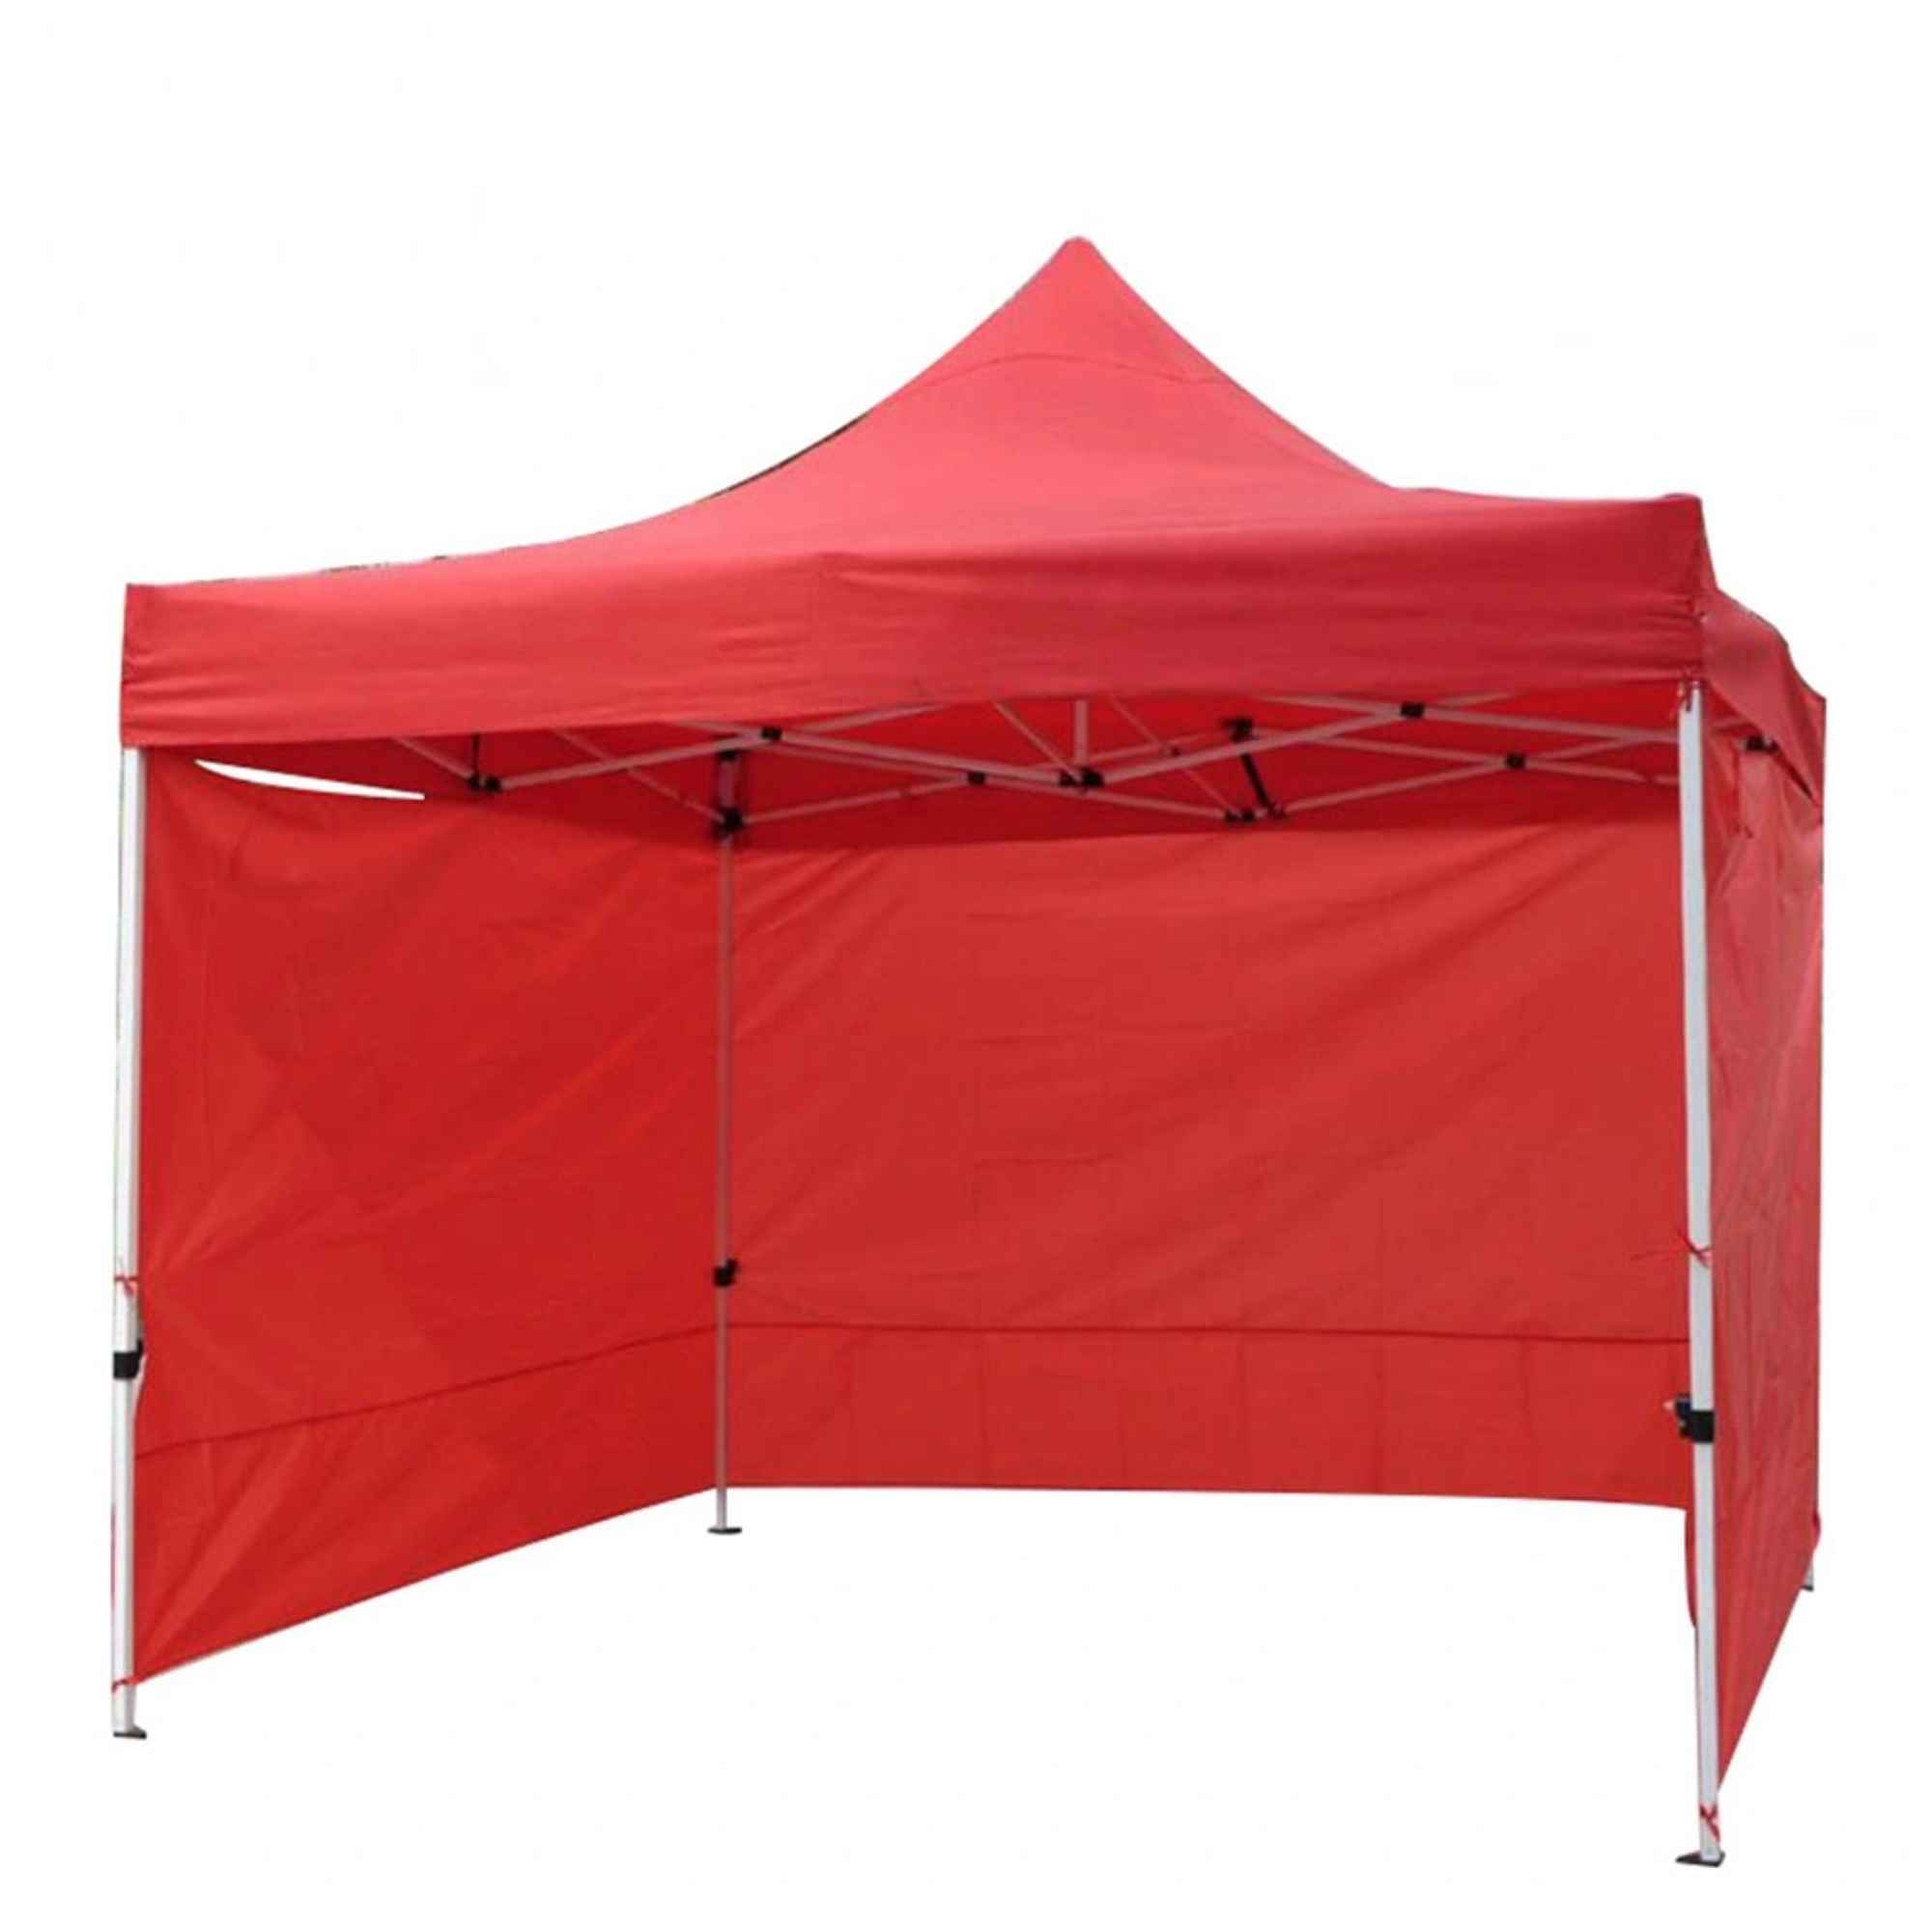 2M X 2M Folding TENTAGE CANVAS Red With 4-SIDED Curtain